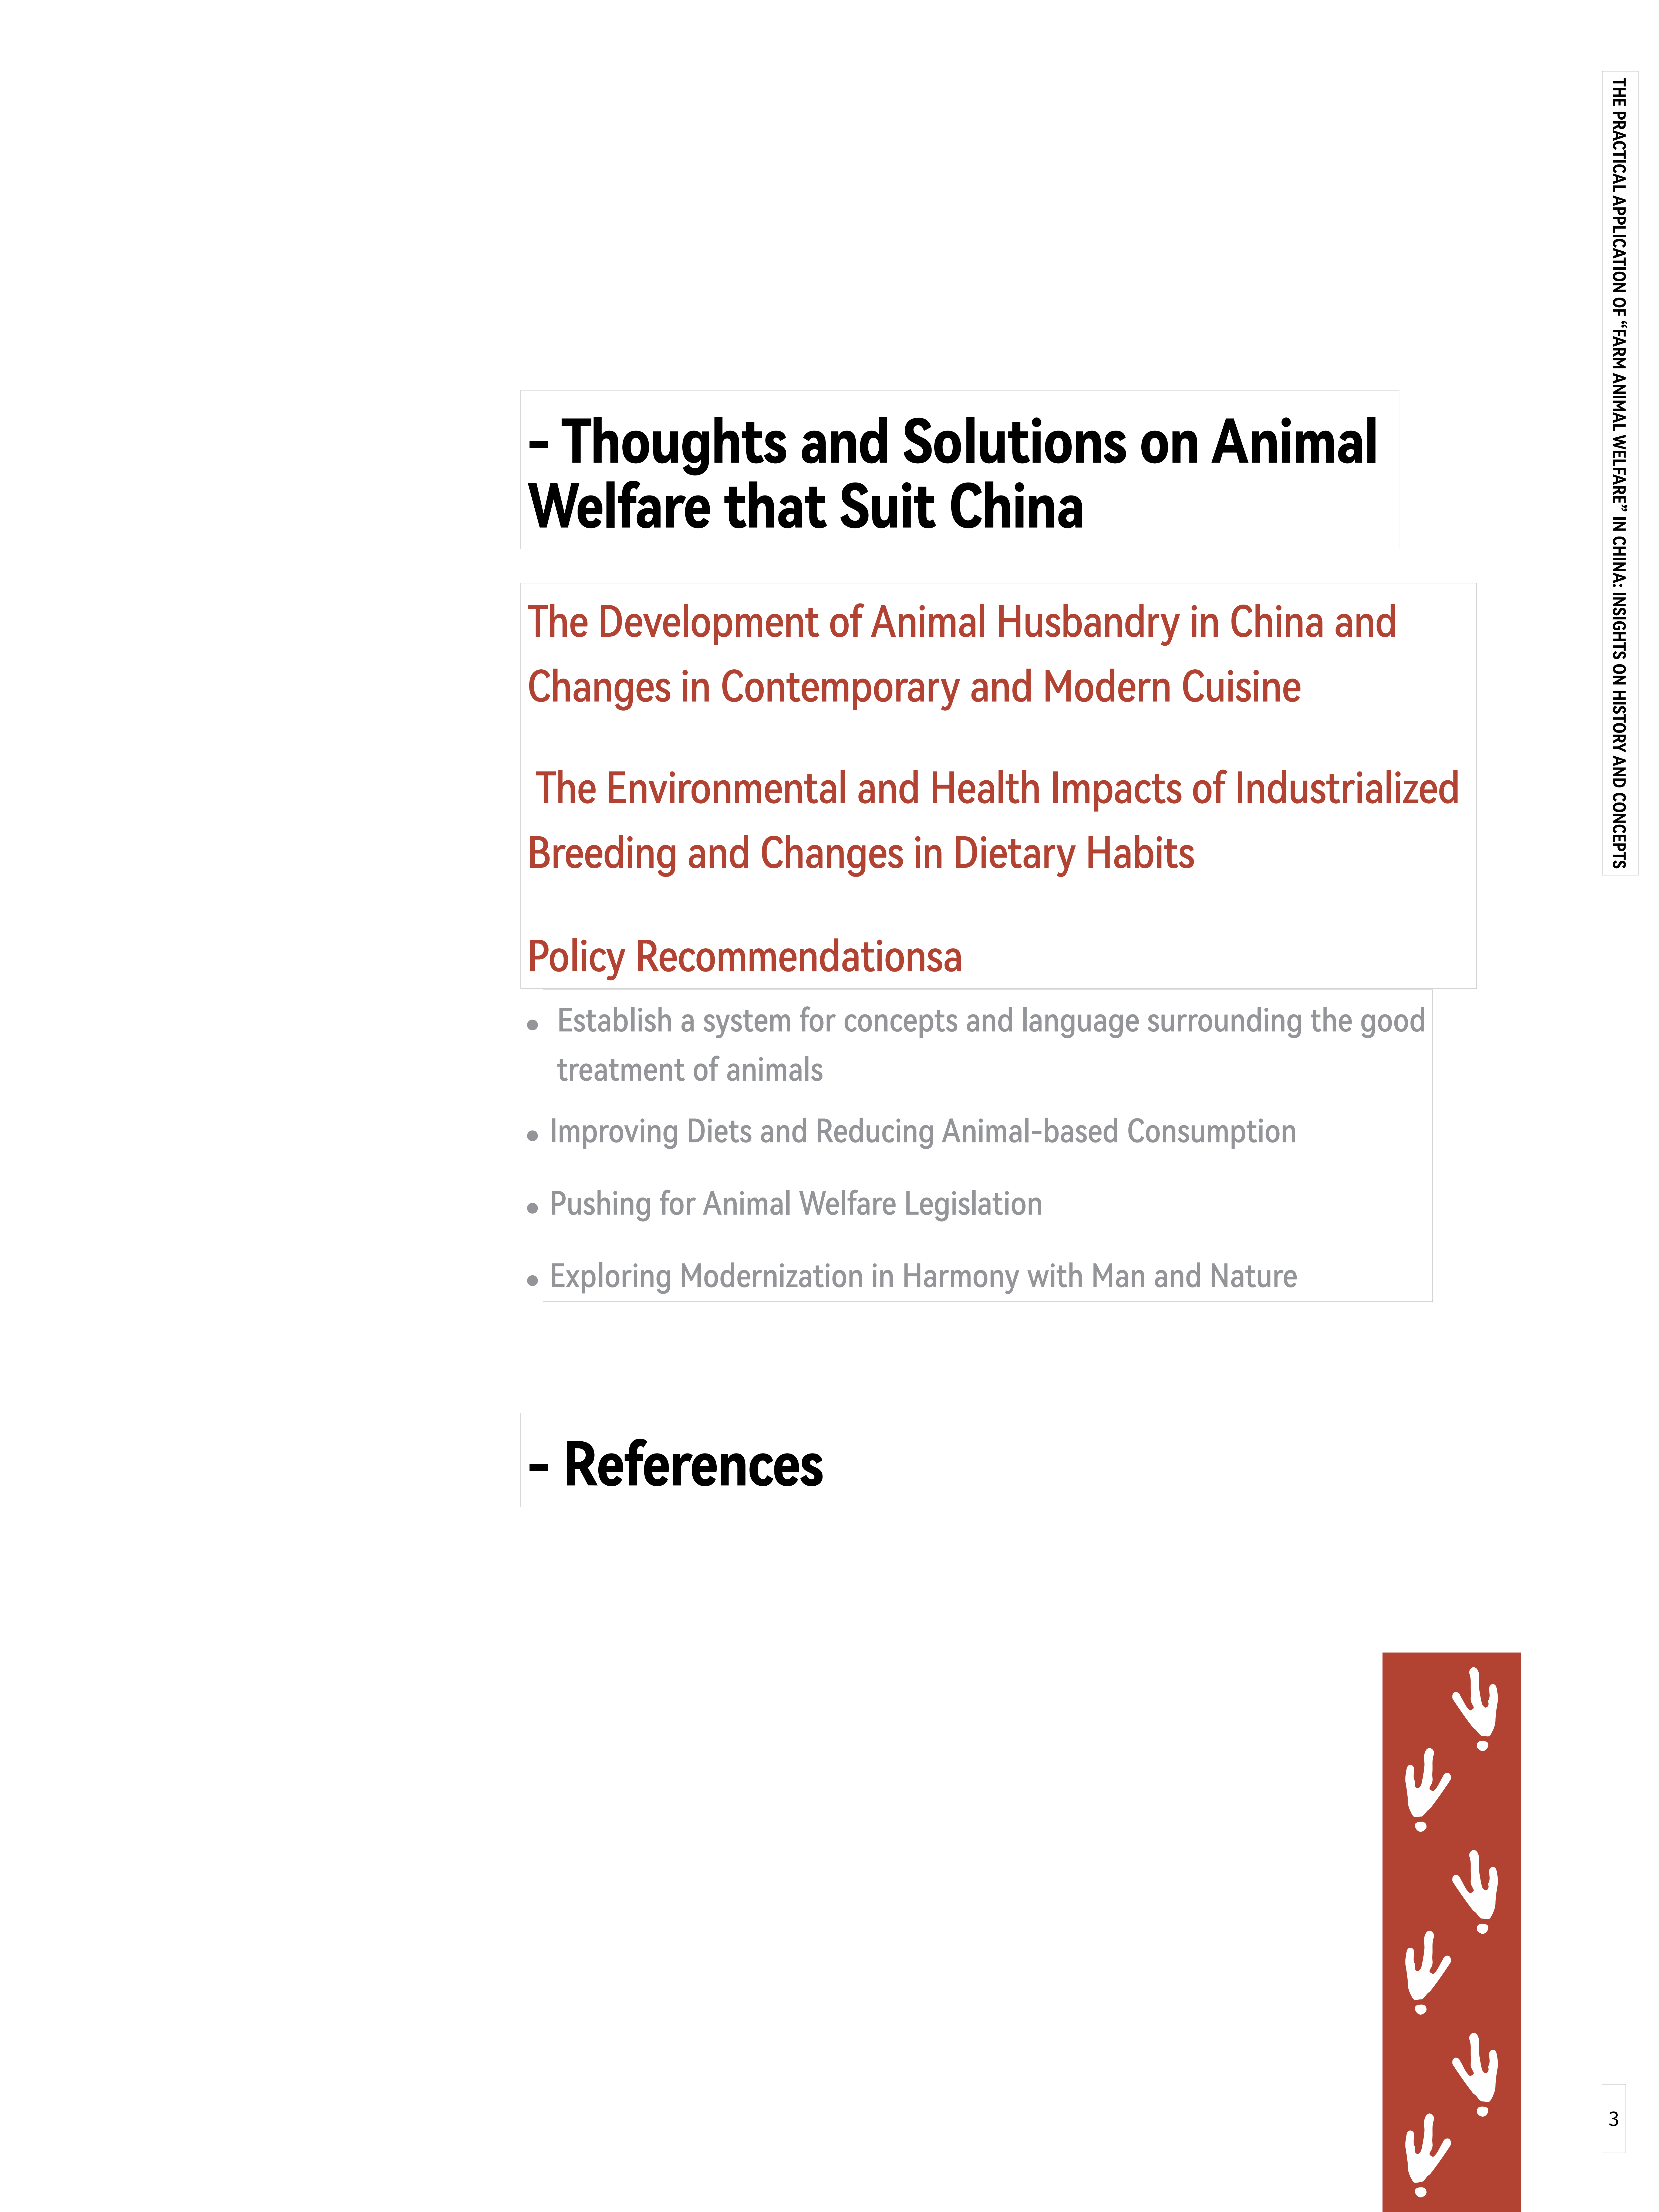 The practical application of farm animal welfare in China- insights on history and concepts_02.png